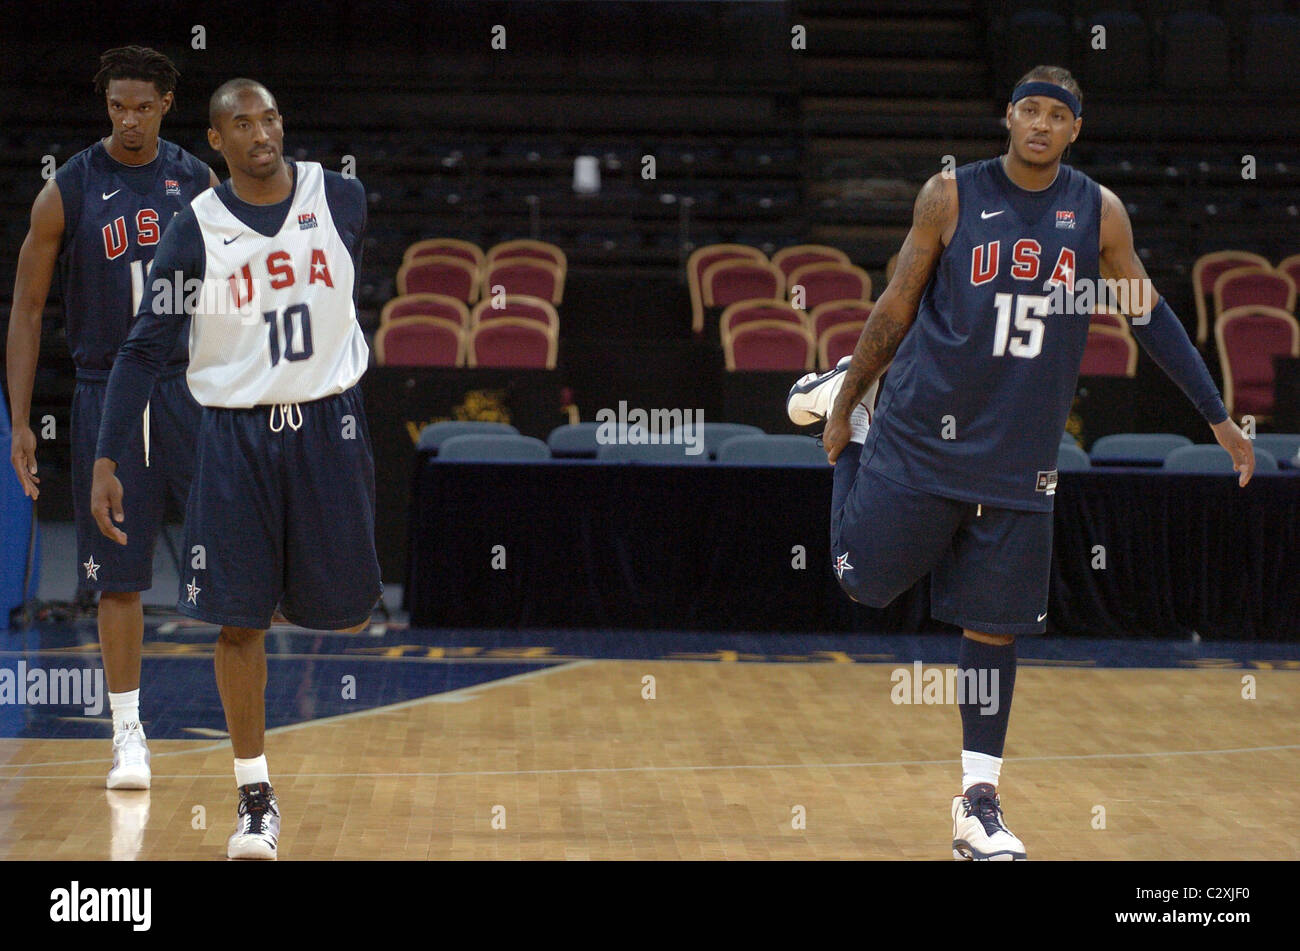 Players Carmelo Anthonyand Kobe Bryant The 08 Usa Basketball Men S National Team Practice During A Training Session For Stock Photo Alamy